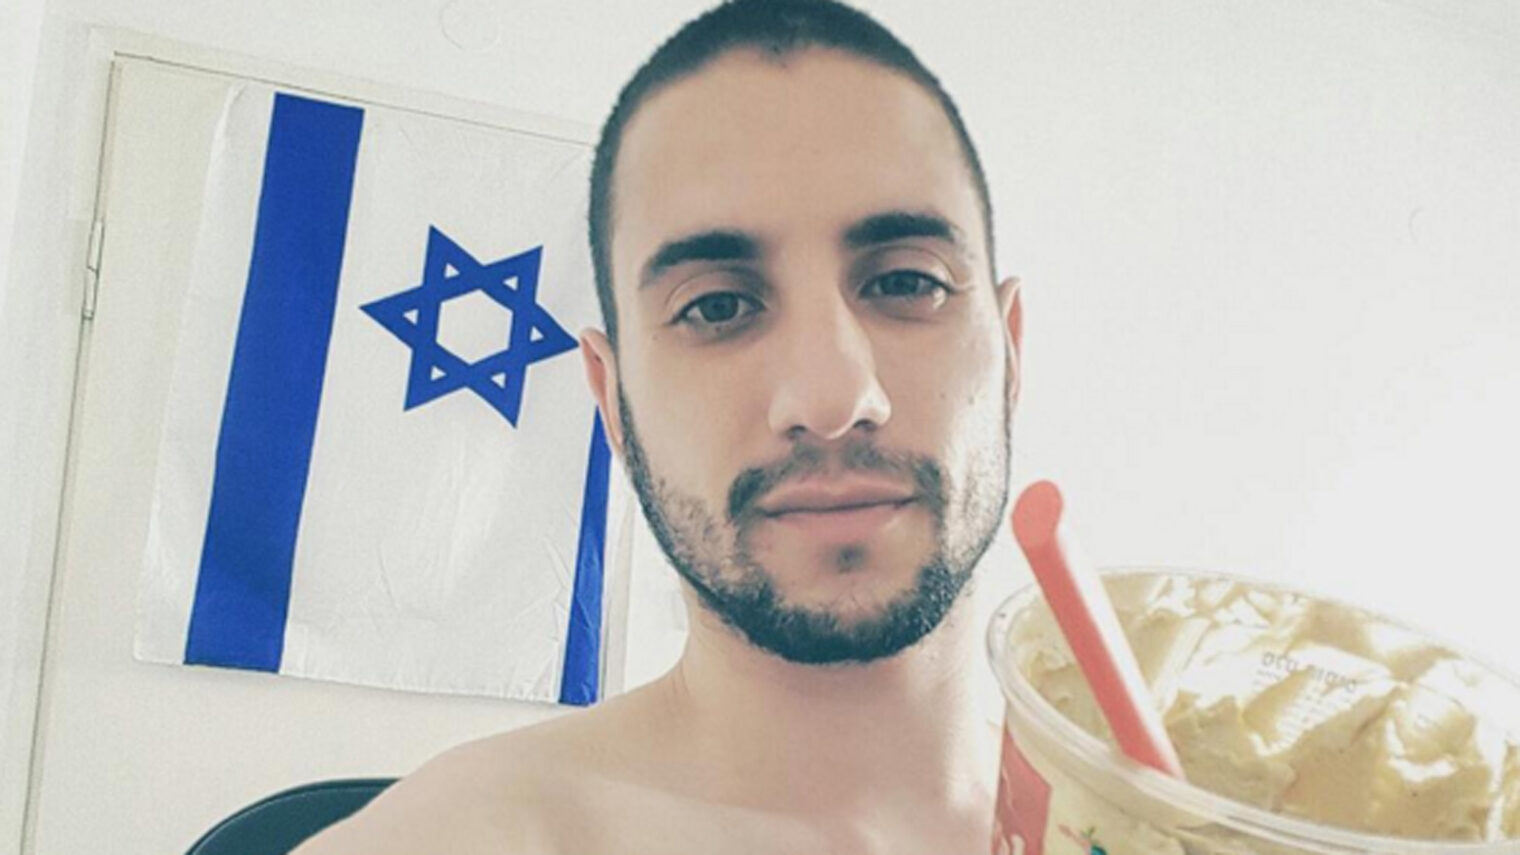 Hummus is hot, and so is he. Photo via Instagram